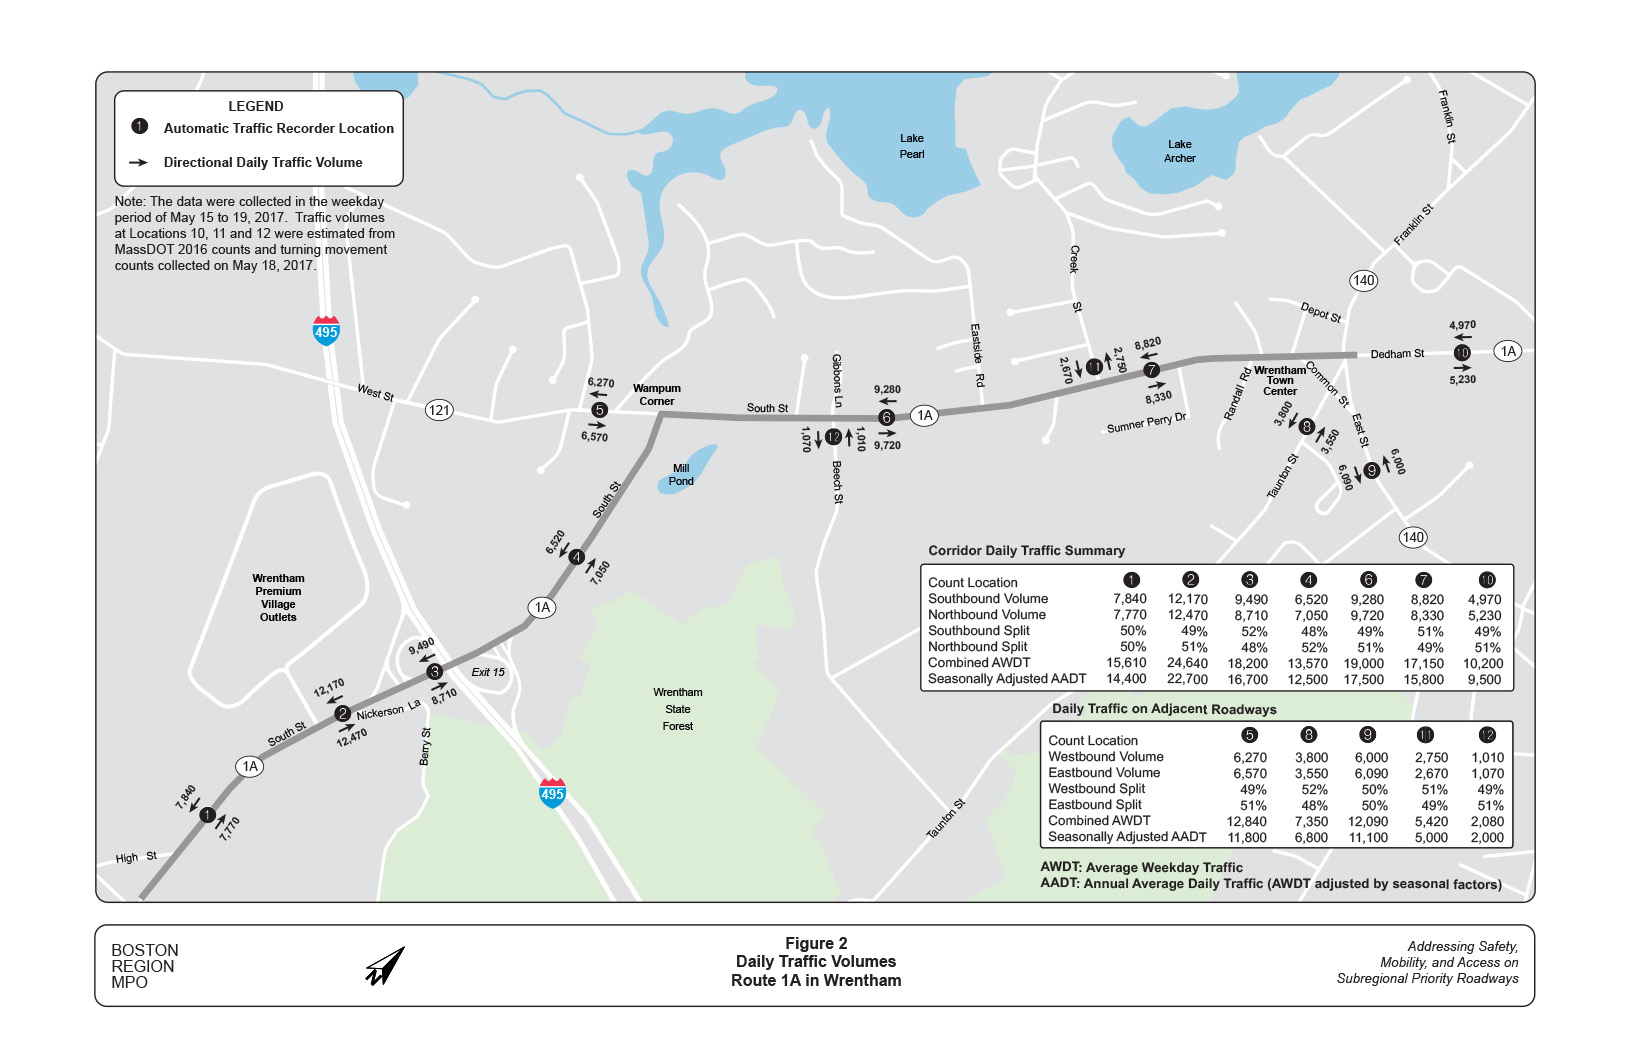 Figure 2 is a map showing the daily traffic volumes on sections of Route 1A in Wrentham.